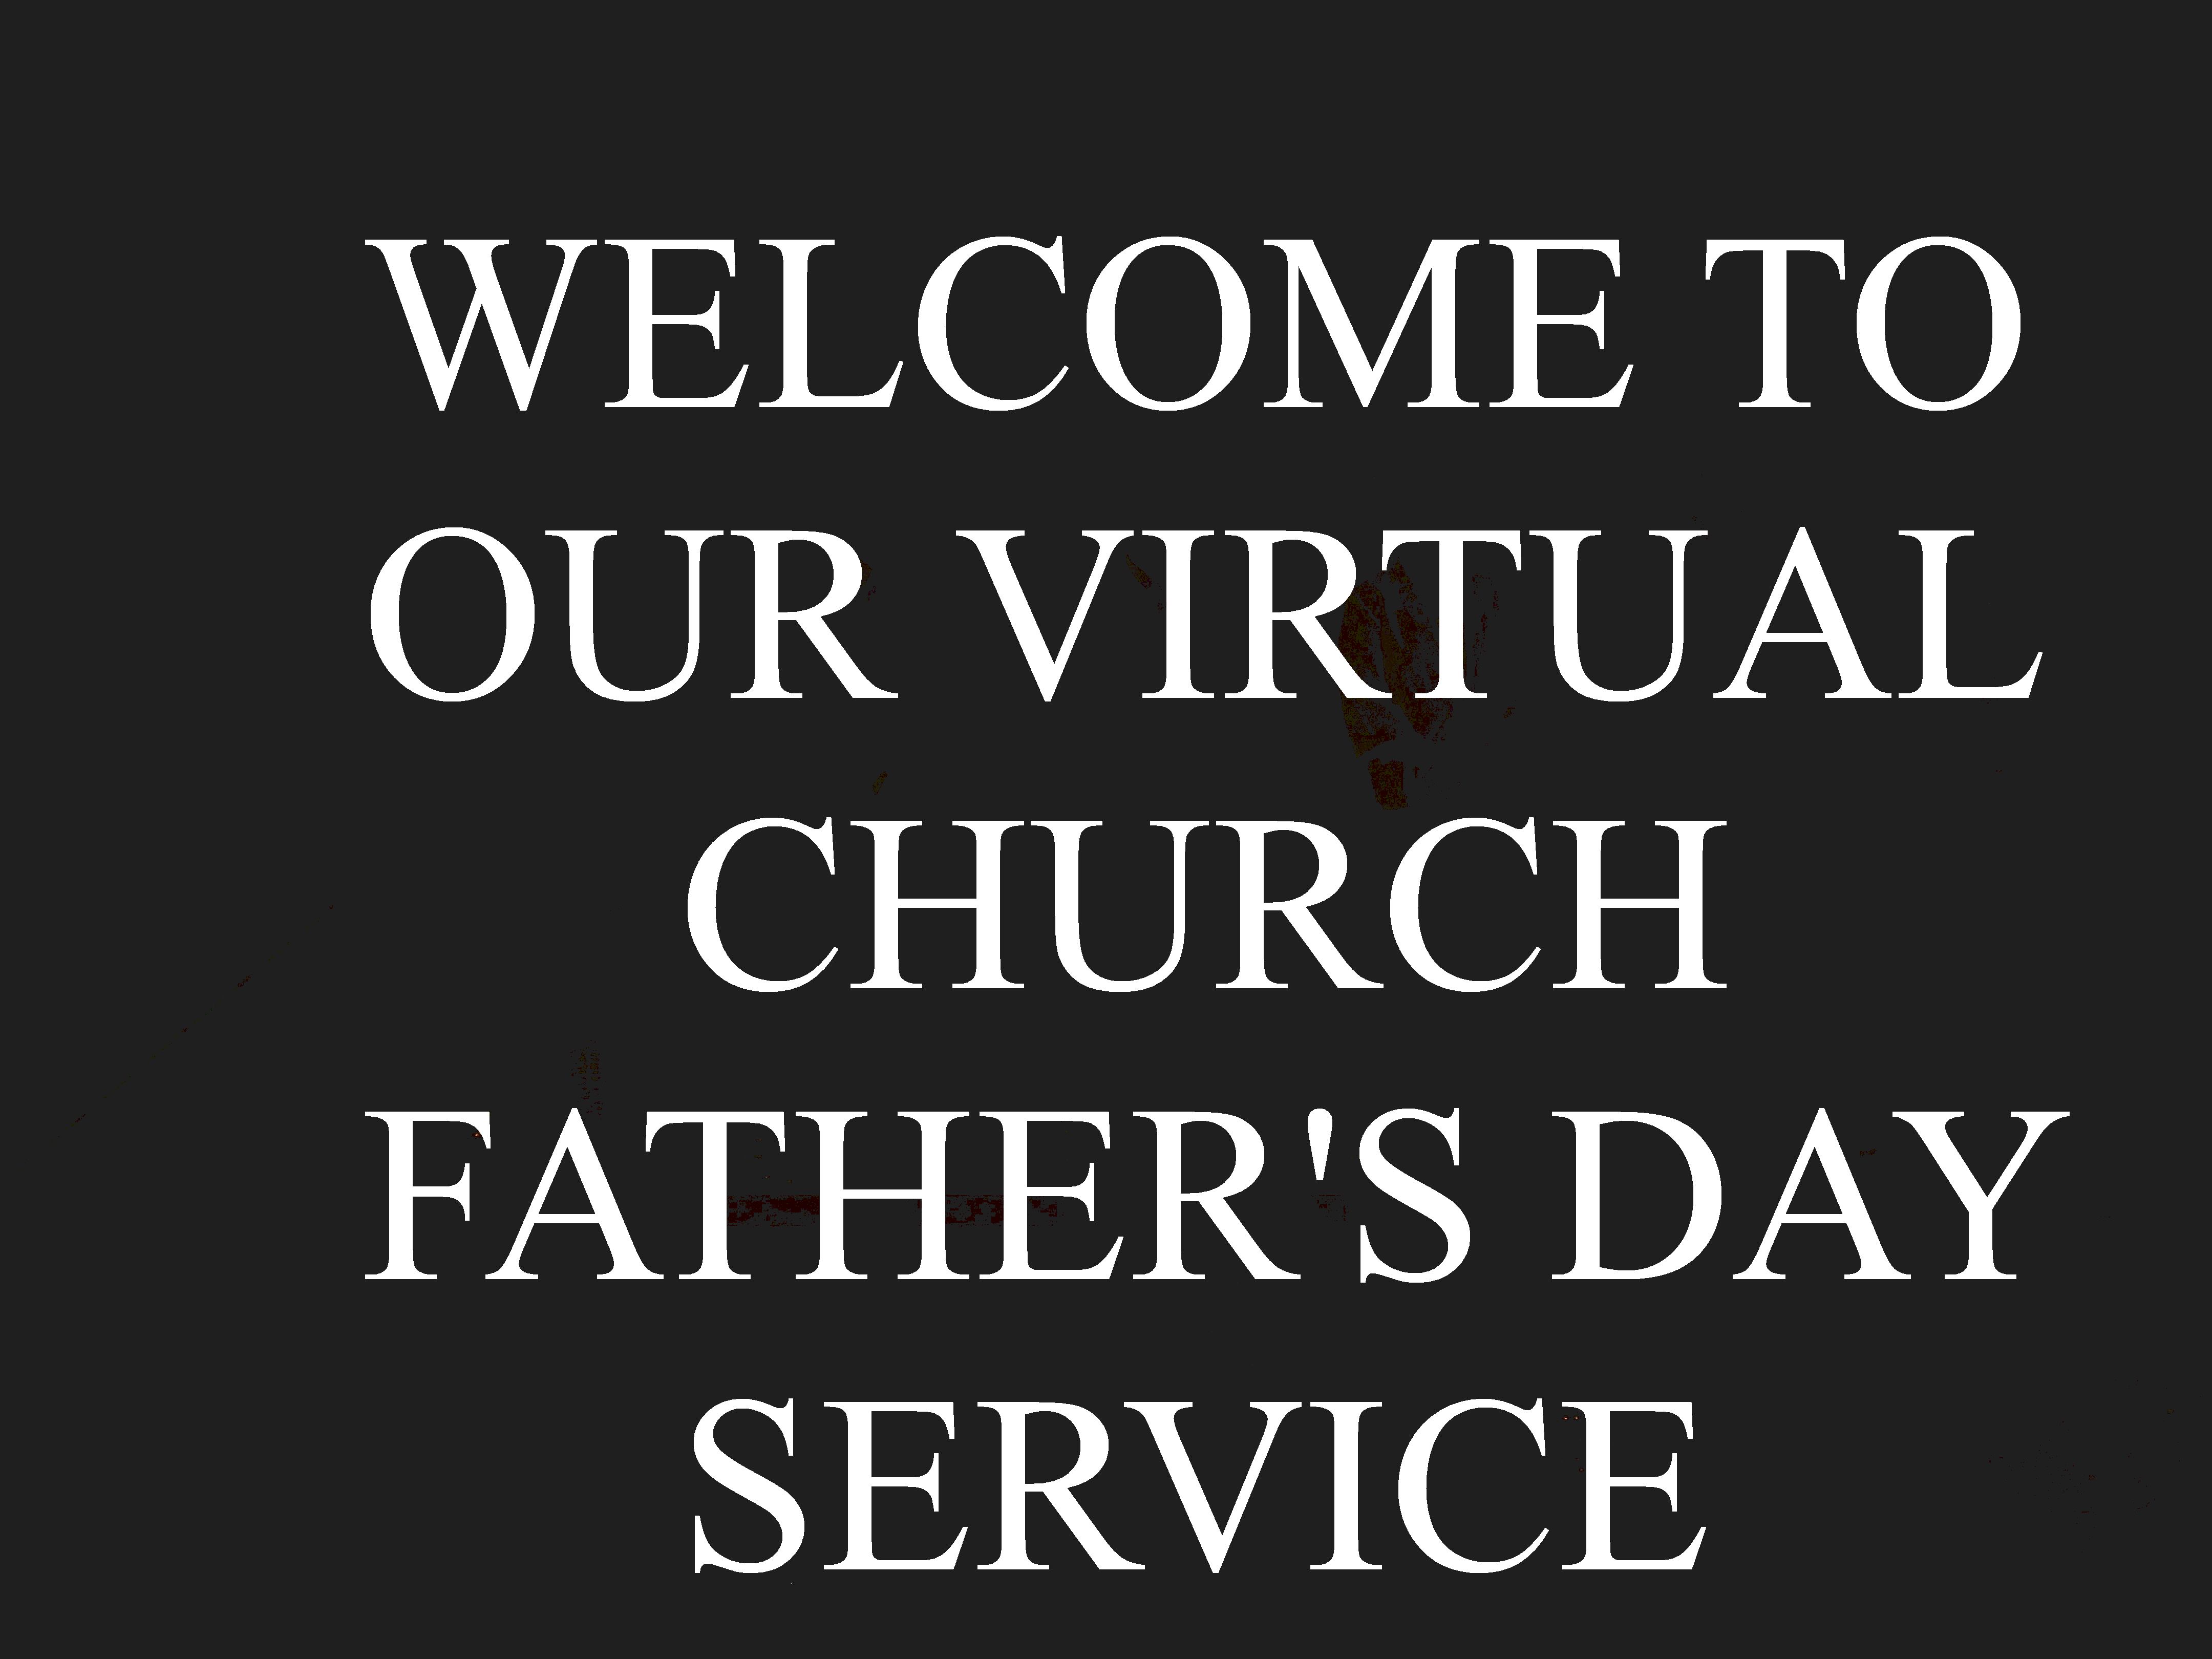 Father's day hopes - prayer for fathers' day, special hopes for care of him